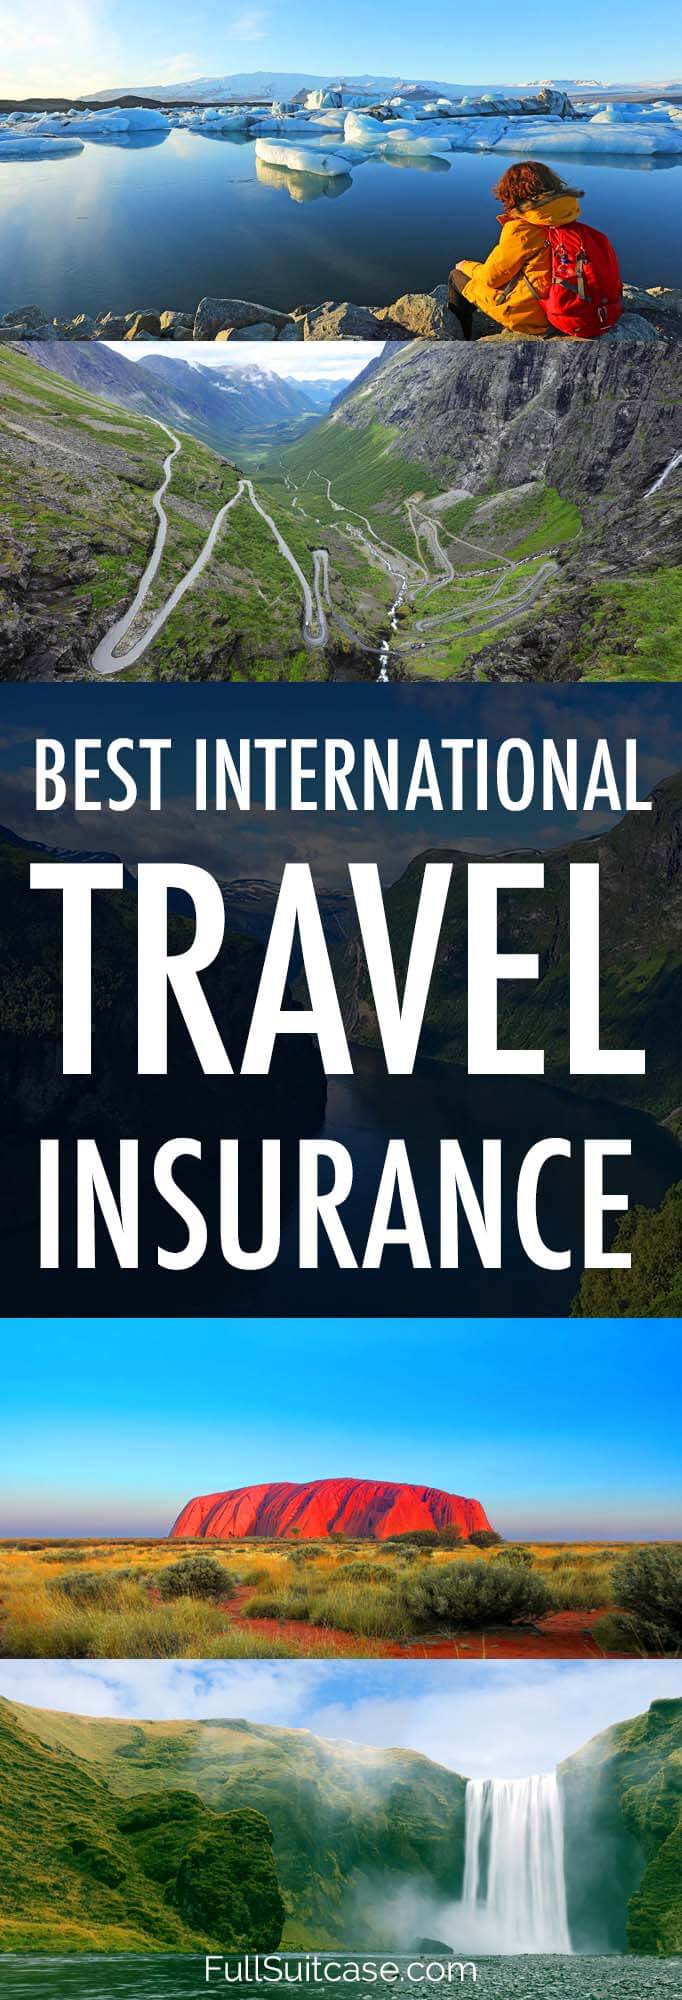 Top rated international travel insurance with worldwide coverage - featuring tips, reviews, and stories from real travelers #insurance #travel #travelinsurance